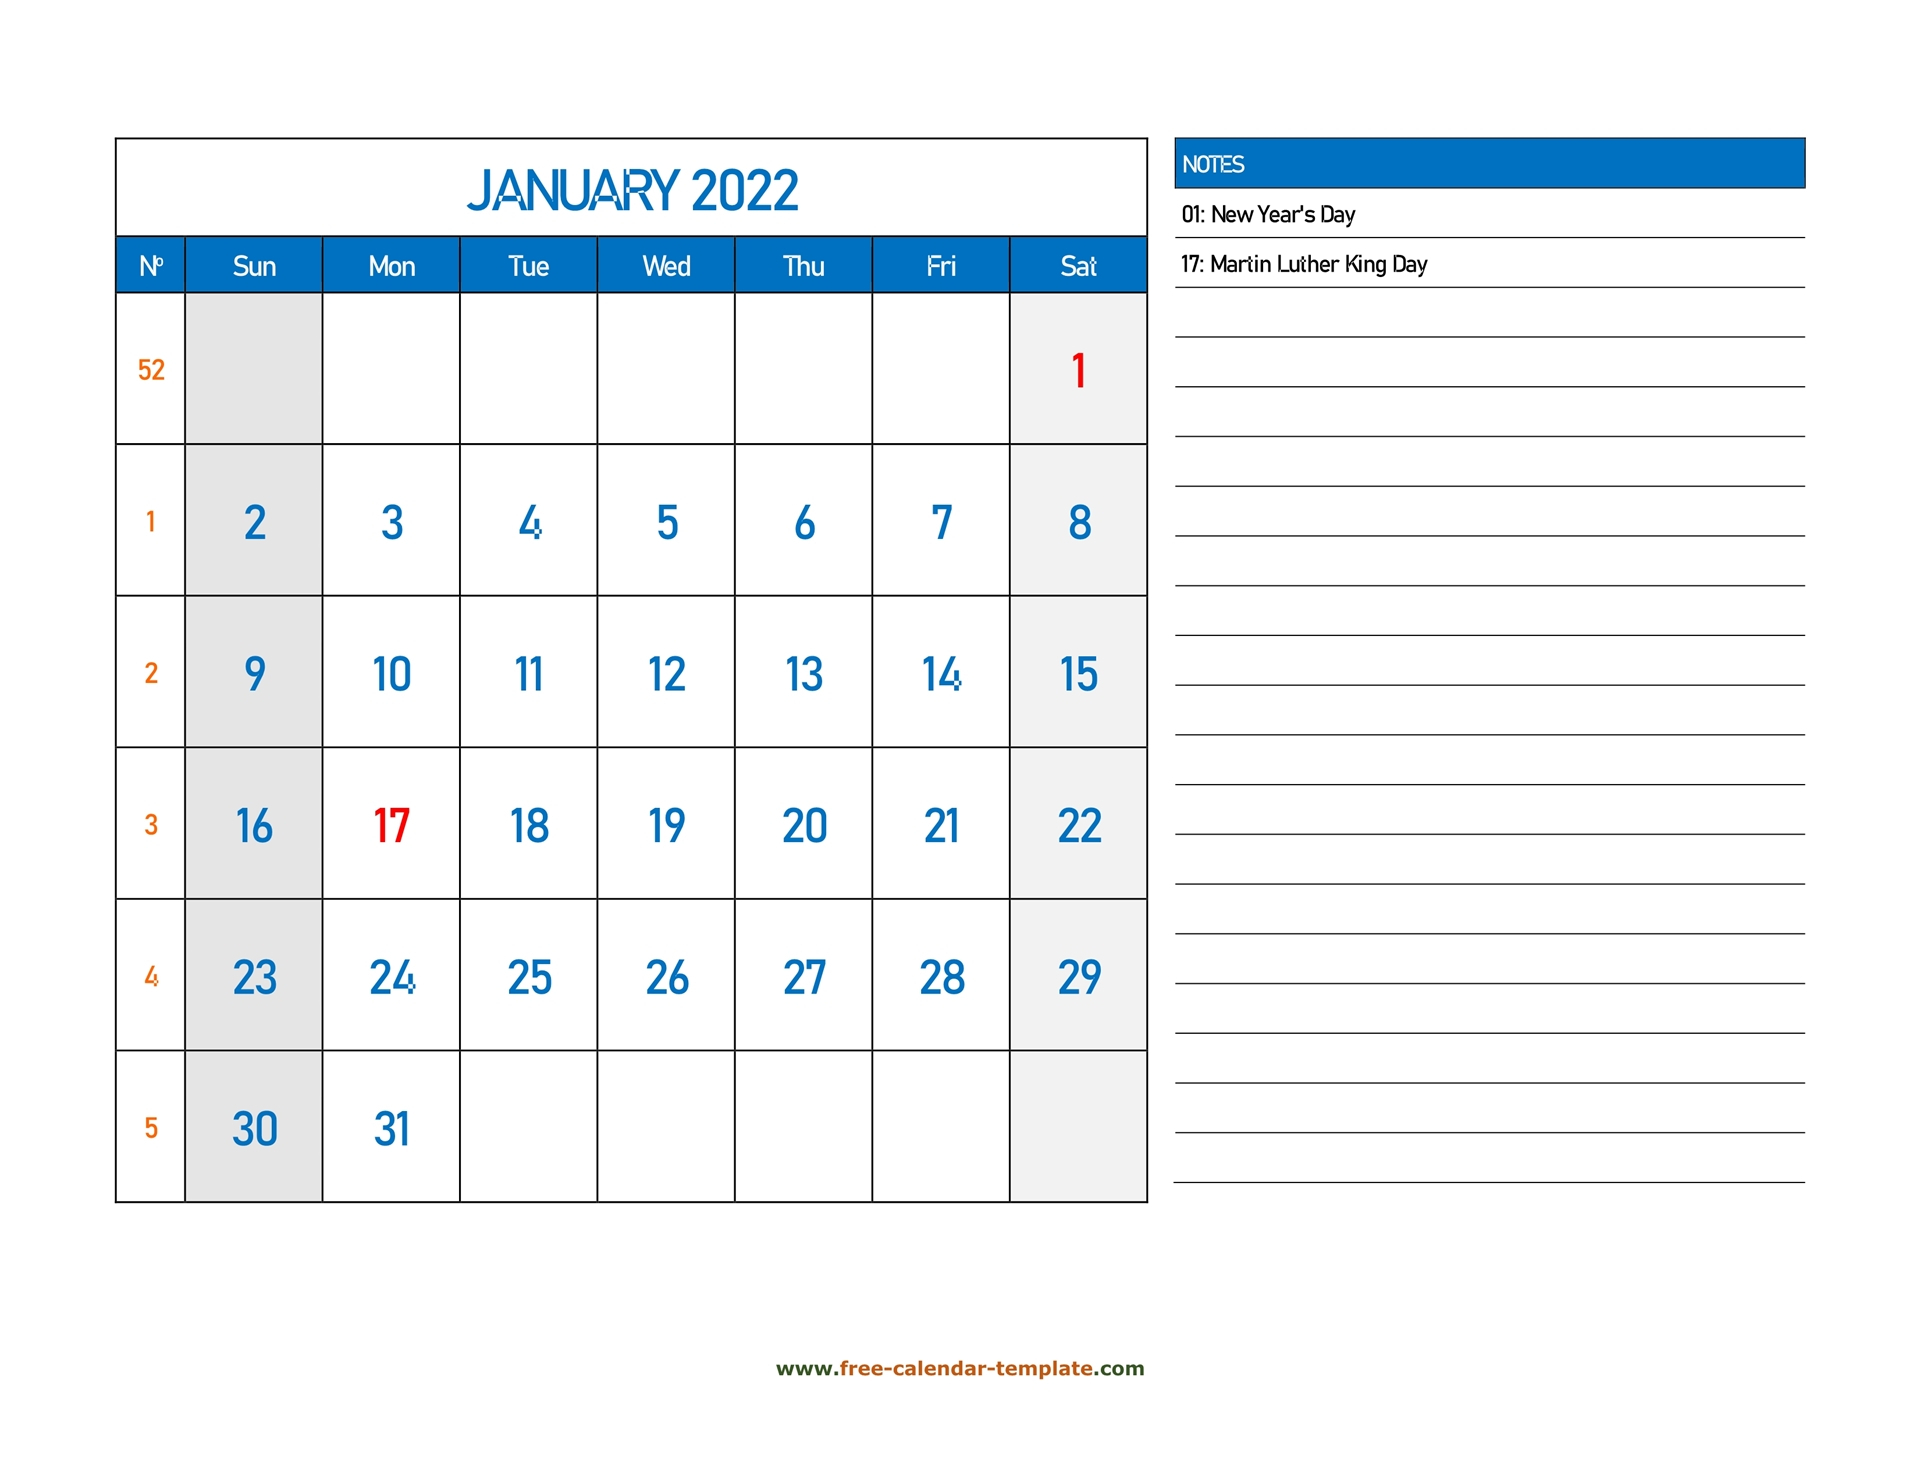 January Calendar 2022 Grid Lines For Holidays And Notes